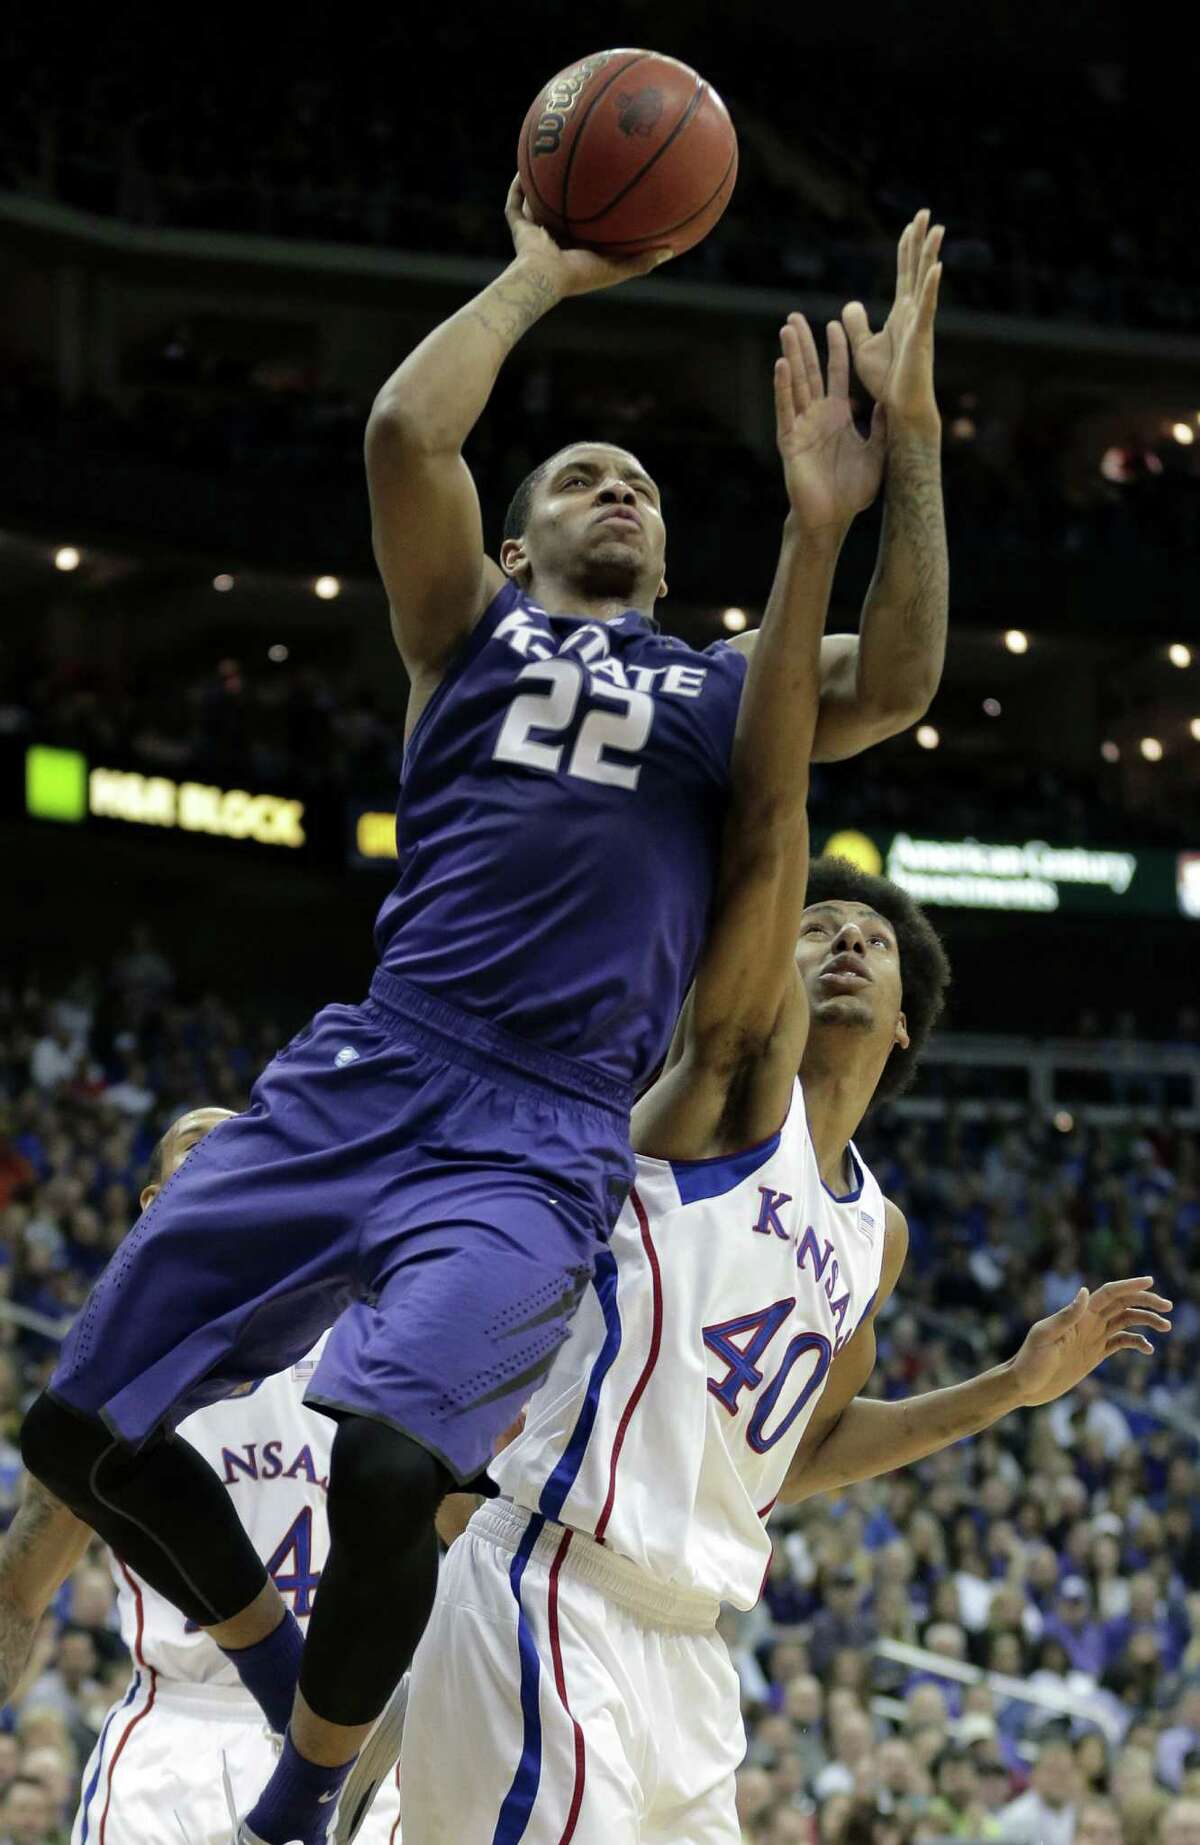 Kansas State's Rodney McGruder leads the Wildcats with 15.7 points and 5.4 rebounds per game.